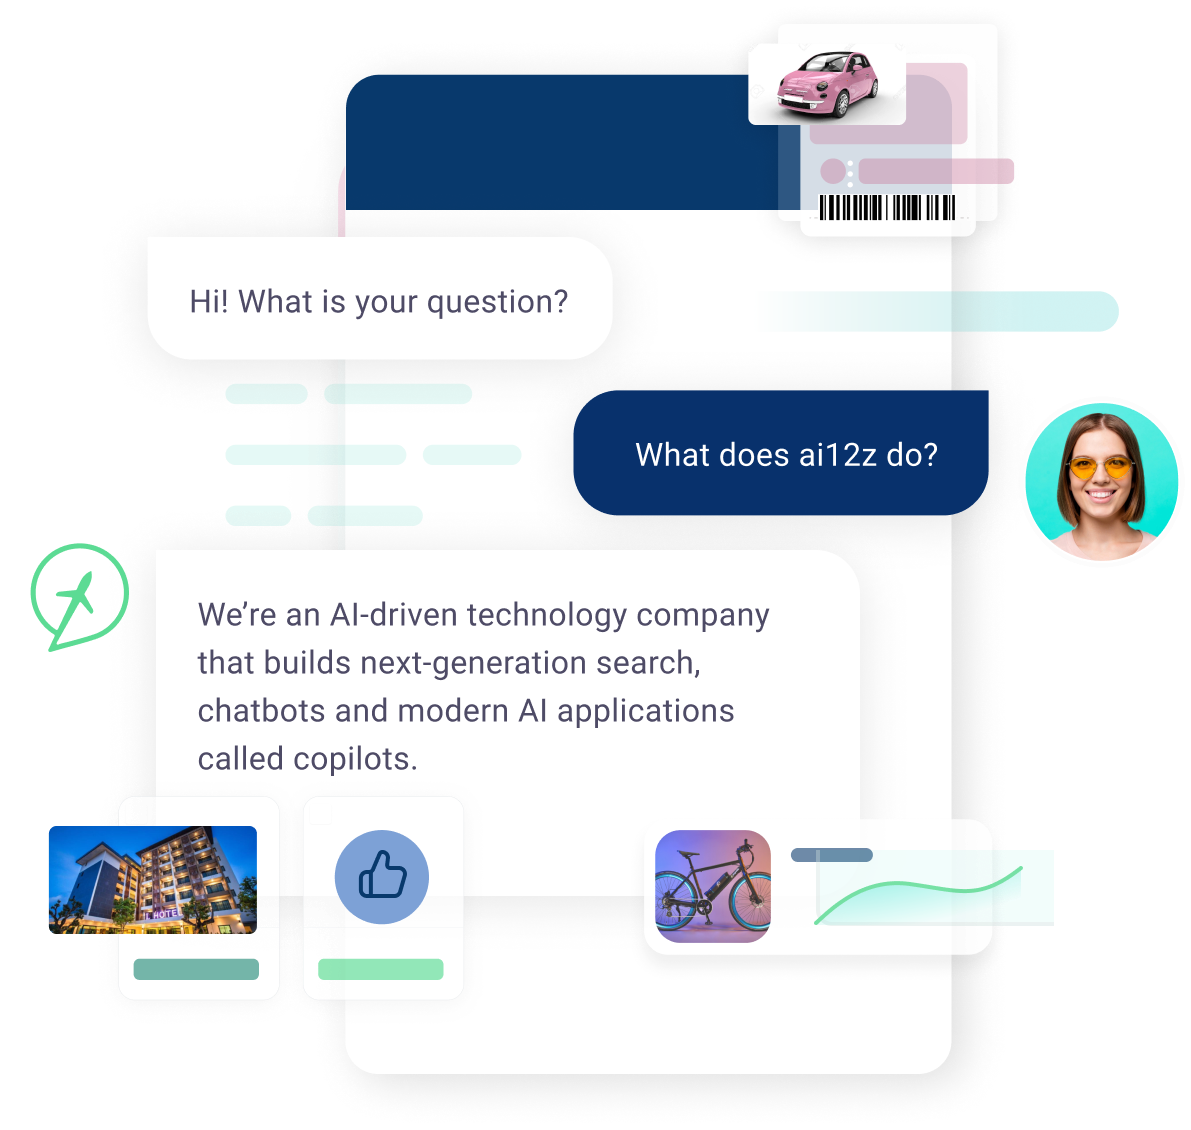 The image showcases a graphical chat interface with a question from a user asking "What does ai12z do?" and a response from the chatbot stating that ai12z is an AI-driven technology company that builds next-generation search, chatbots, and modern AI applications called copilots. The chat interface is adorned with colorful icons and images representing cars, buildings, and bicycles, illustrating the diverse applications of ai12z's technology.